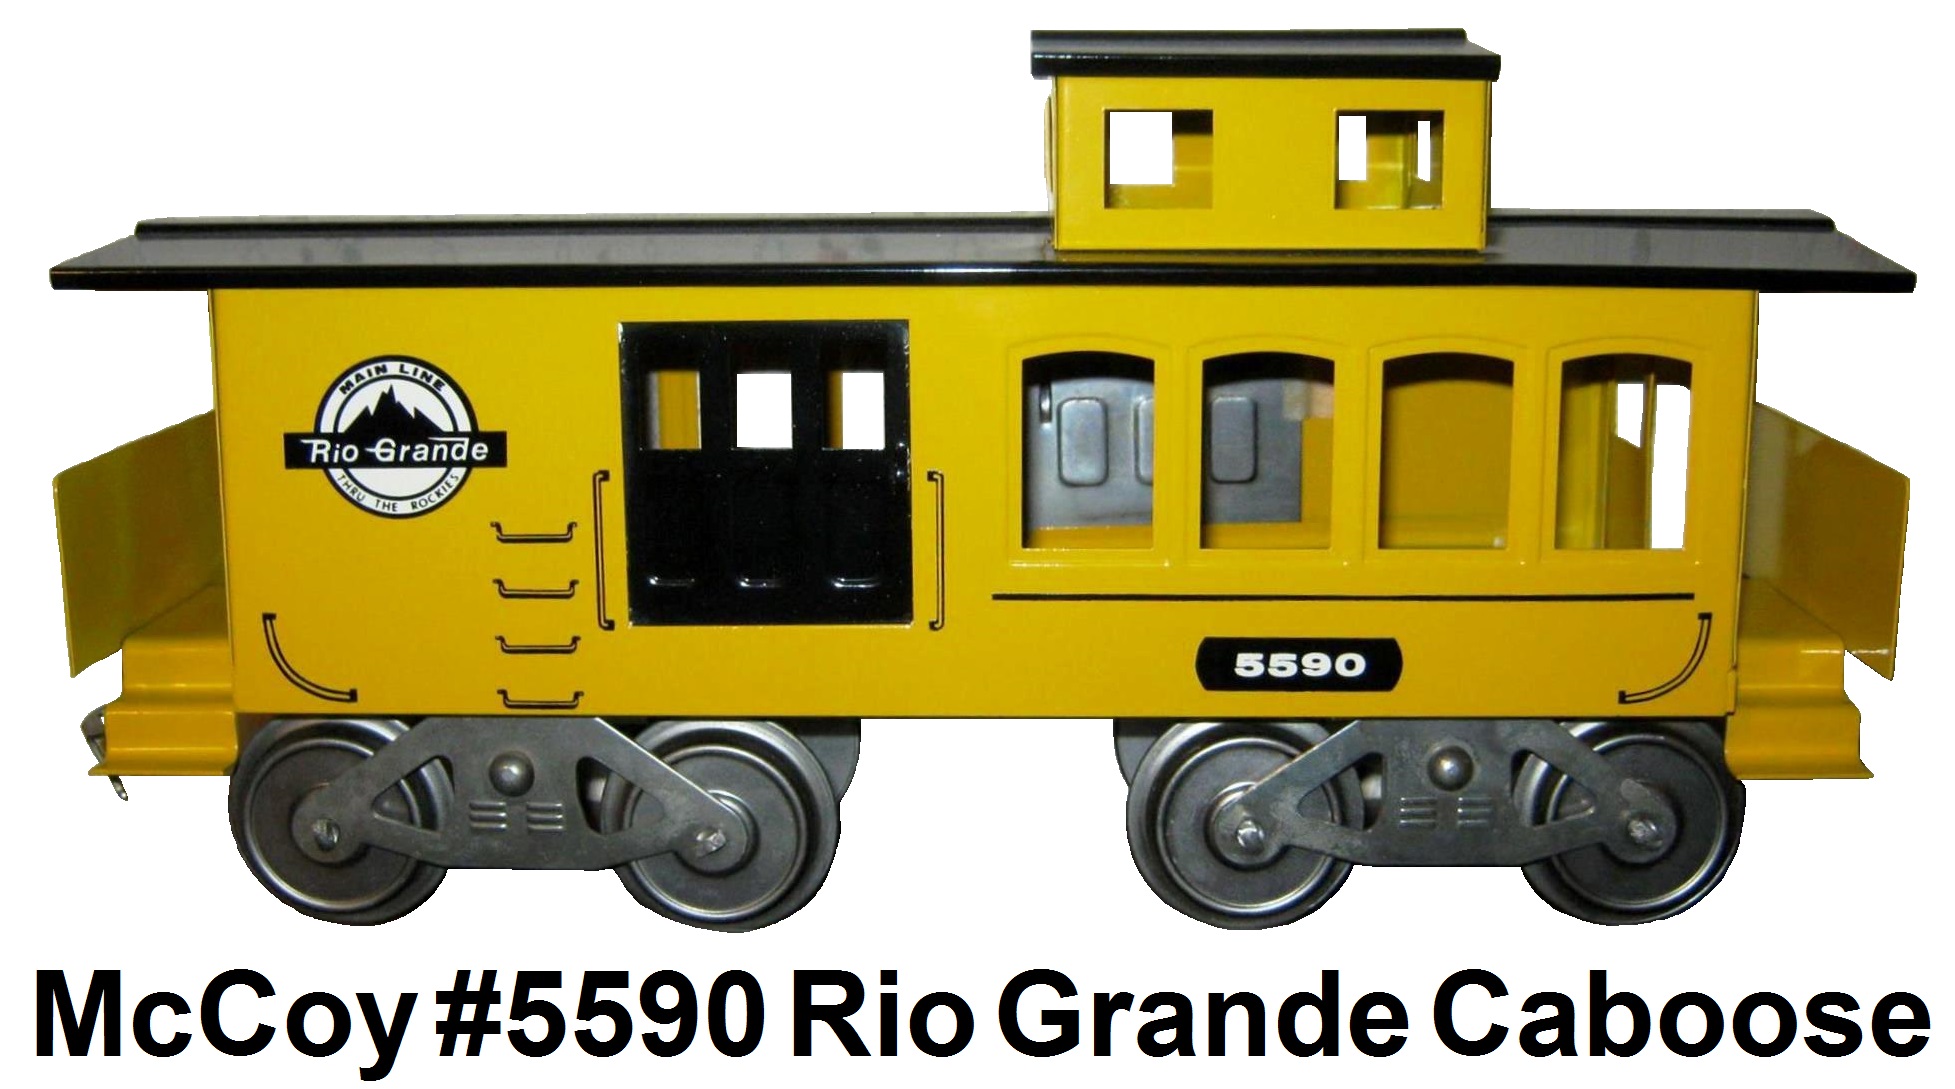 McCoy Standard gauge #5590 Rio Grande Caboose built with 2 right sides